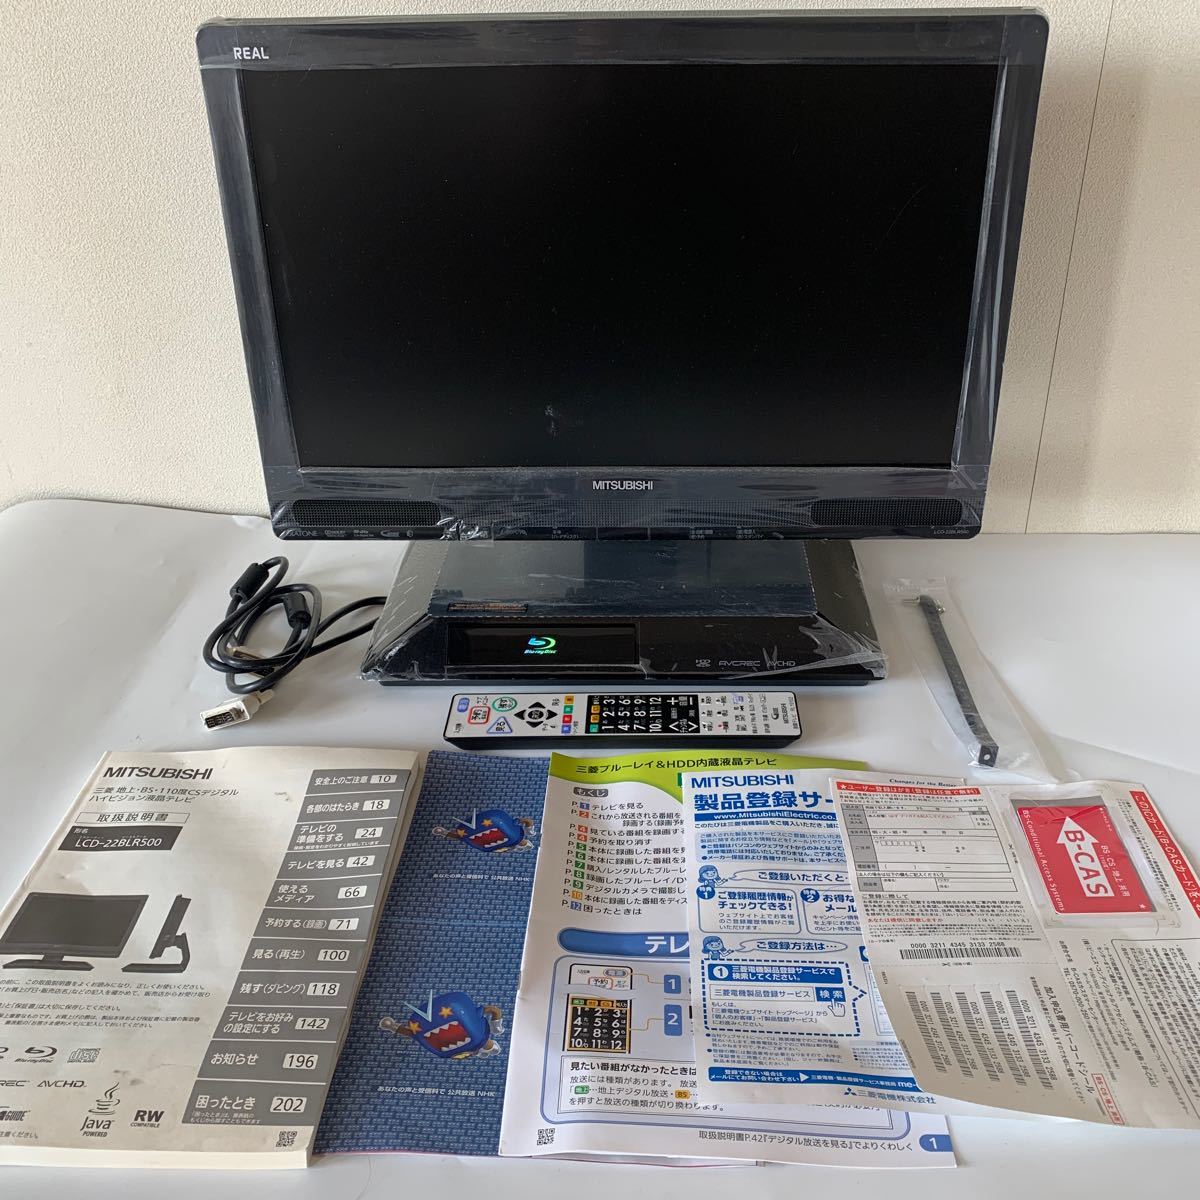  free shipping prompt decision!! Mitsubishi tv real TV Blue-ray DVD correspondence remote control cable owner manual attaching .LCD-22BLR500 electrification verification ..